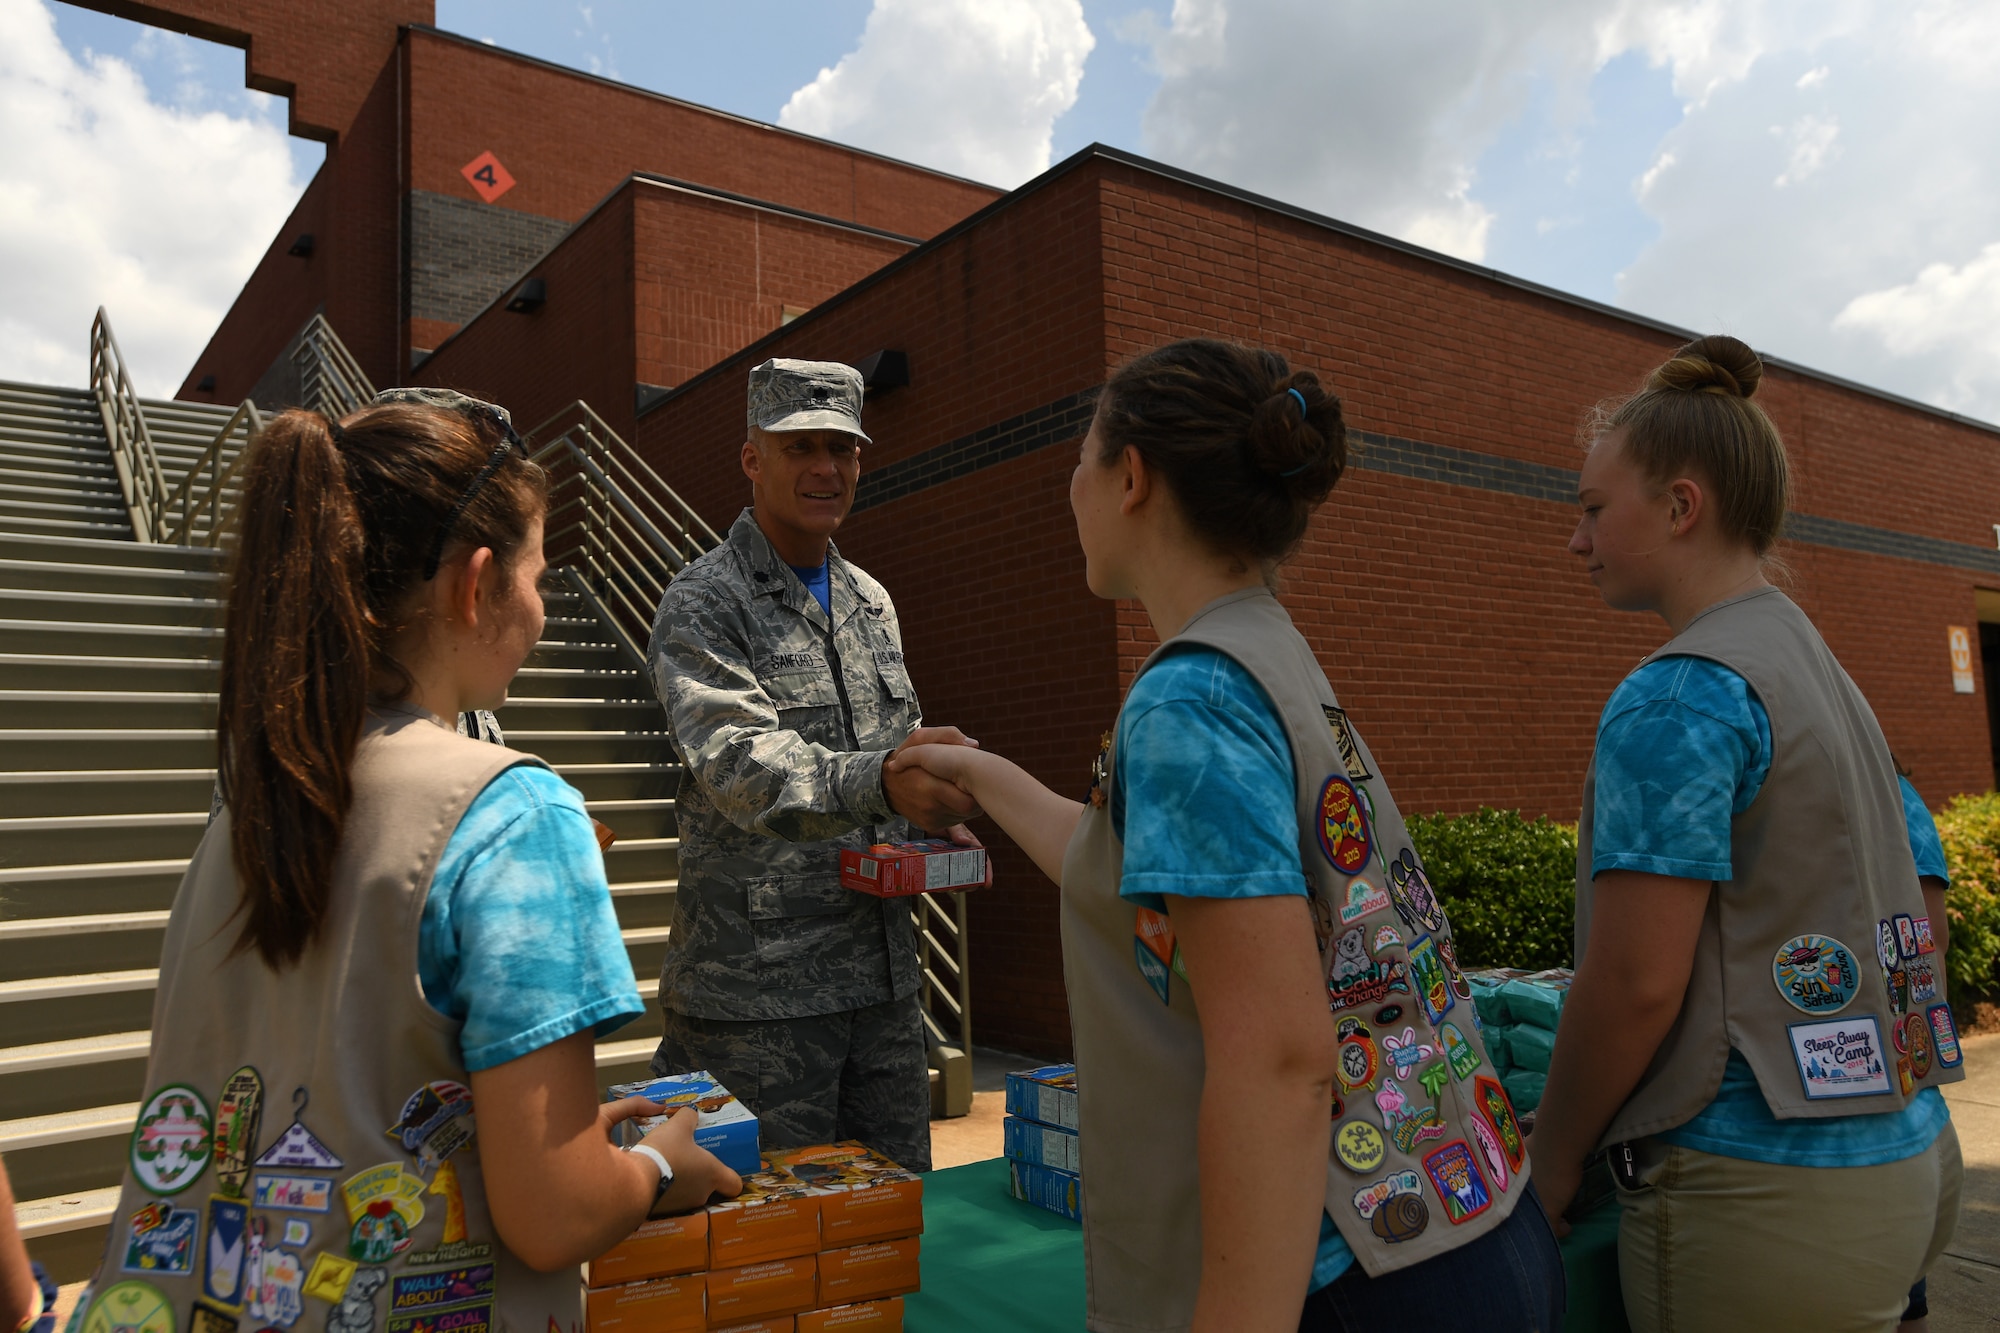 U.S. Air Force Lt. Col. Paul Sanford, 145th Aeromedical Evacuation Squadron, receives a box of cookies from Girl Scouts of Troop 20436, Denver, N.C., as they volunteer during the fifth annual visit to the North Carolina Air National Guard Base, Charlotte Douglas International Airport, June 9, 2018. This is part of a council-wide service project, called Operation Sweet Treat, where Girl Scouts collect cookies to give to U.S. military members serving in the United States and deployed overseas.